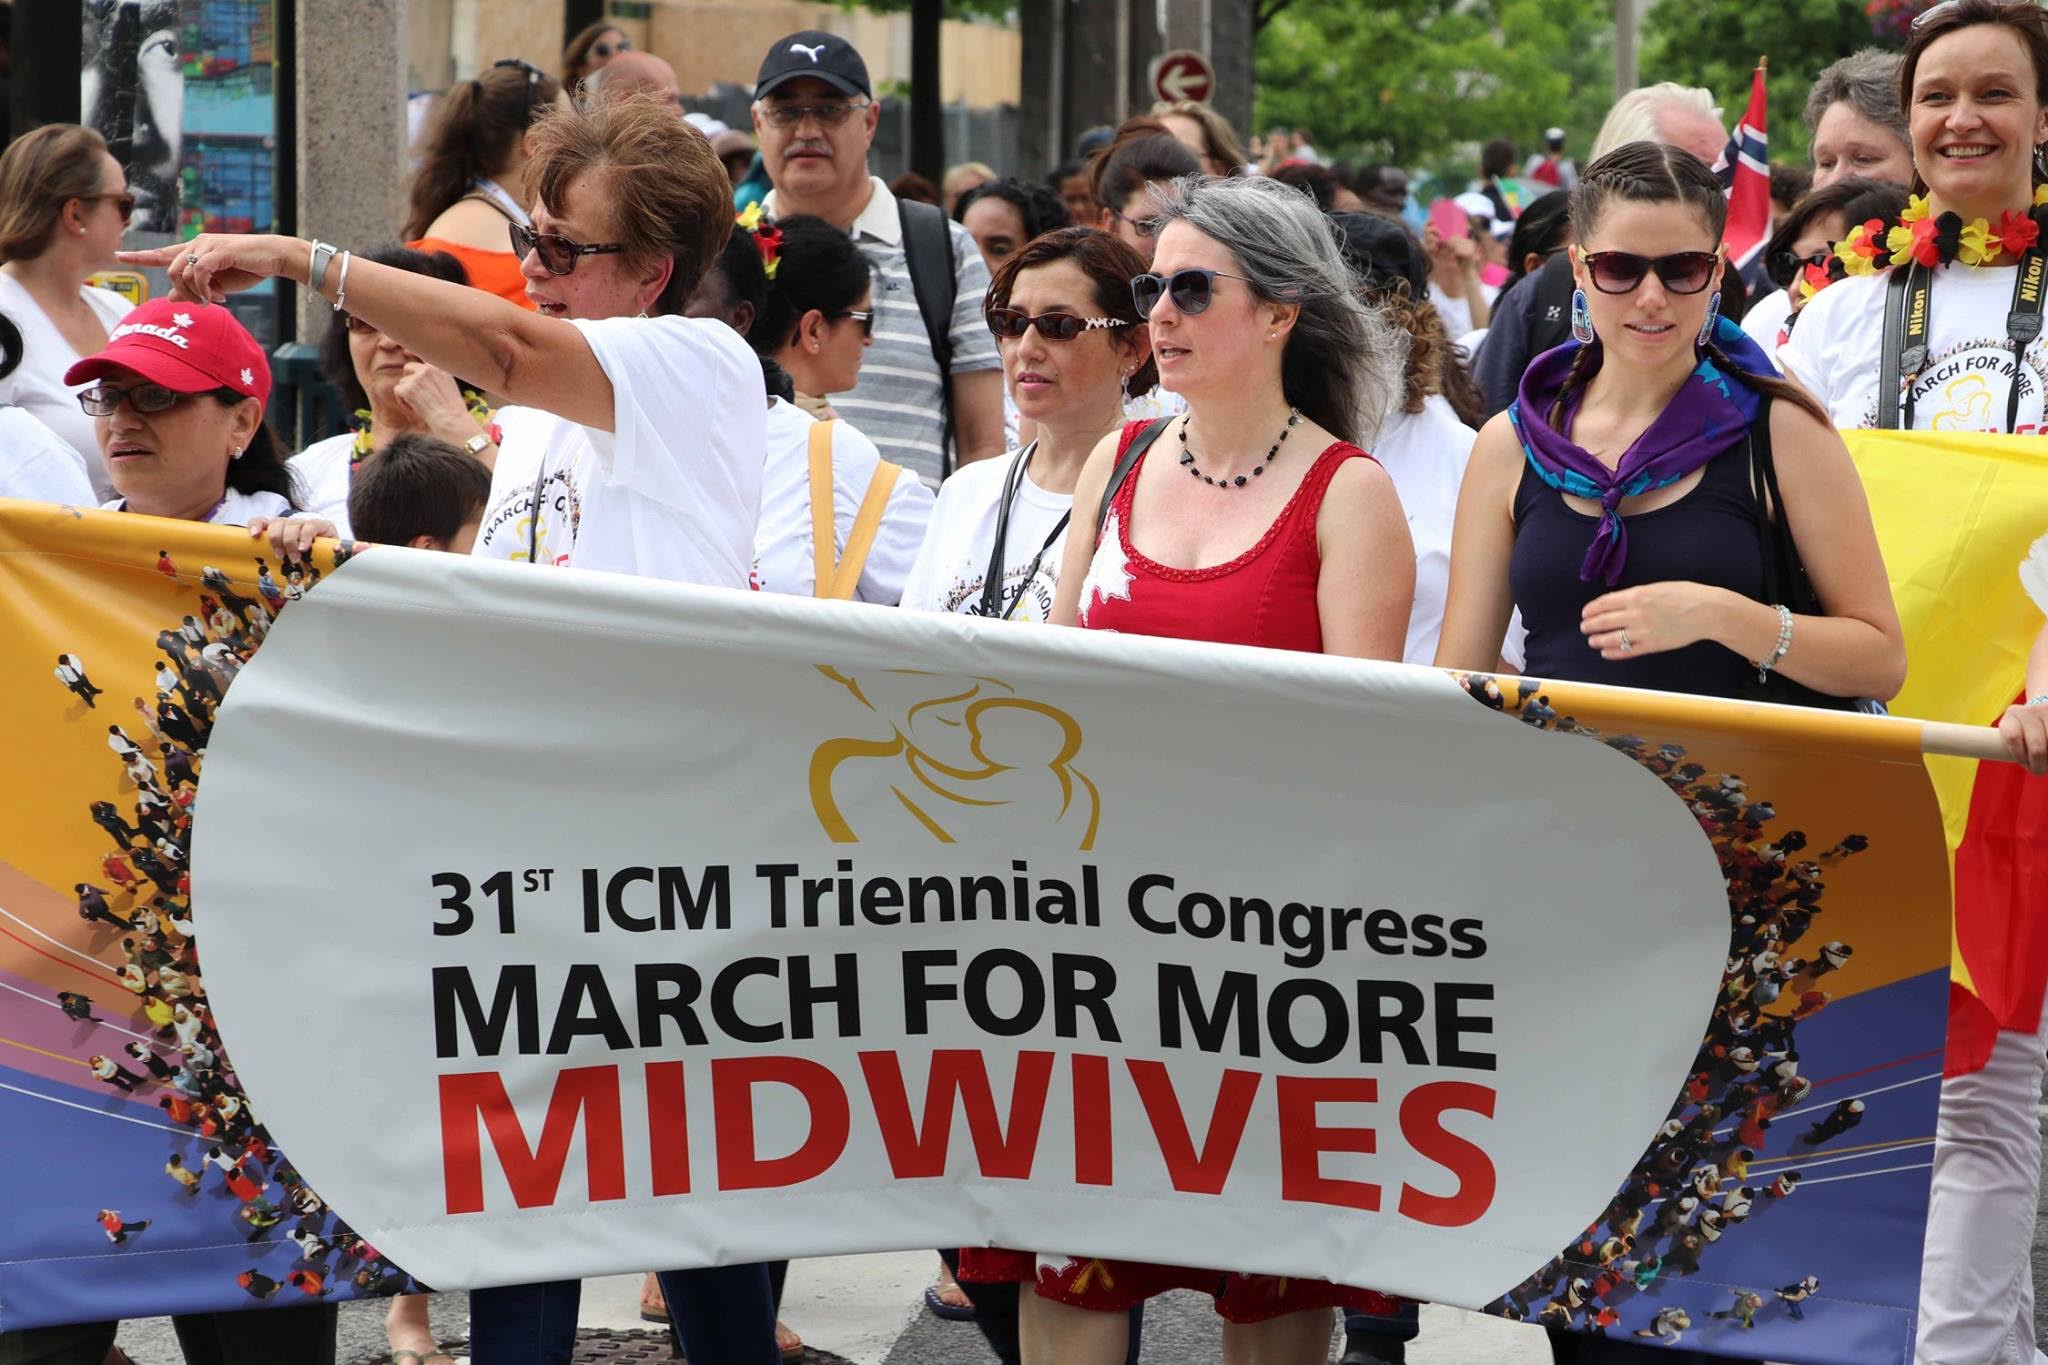 Custom scarves - Midwives March for more